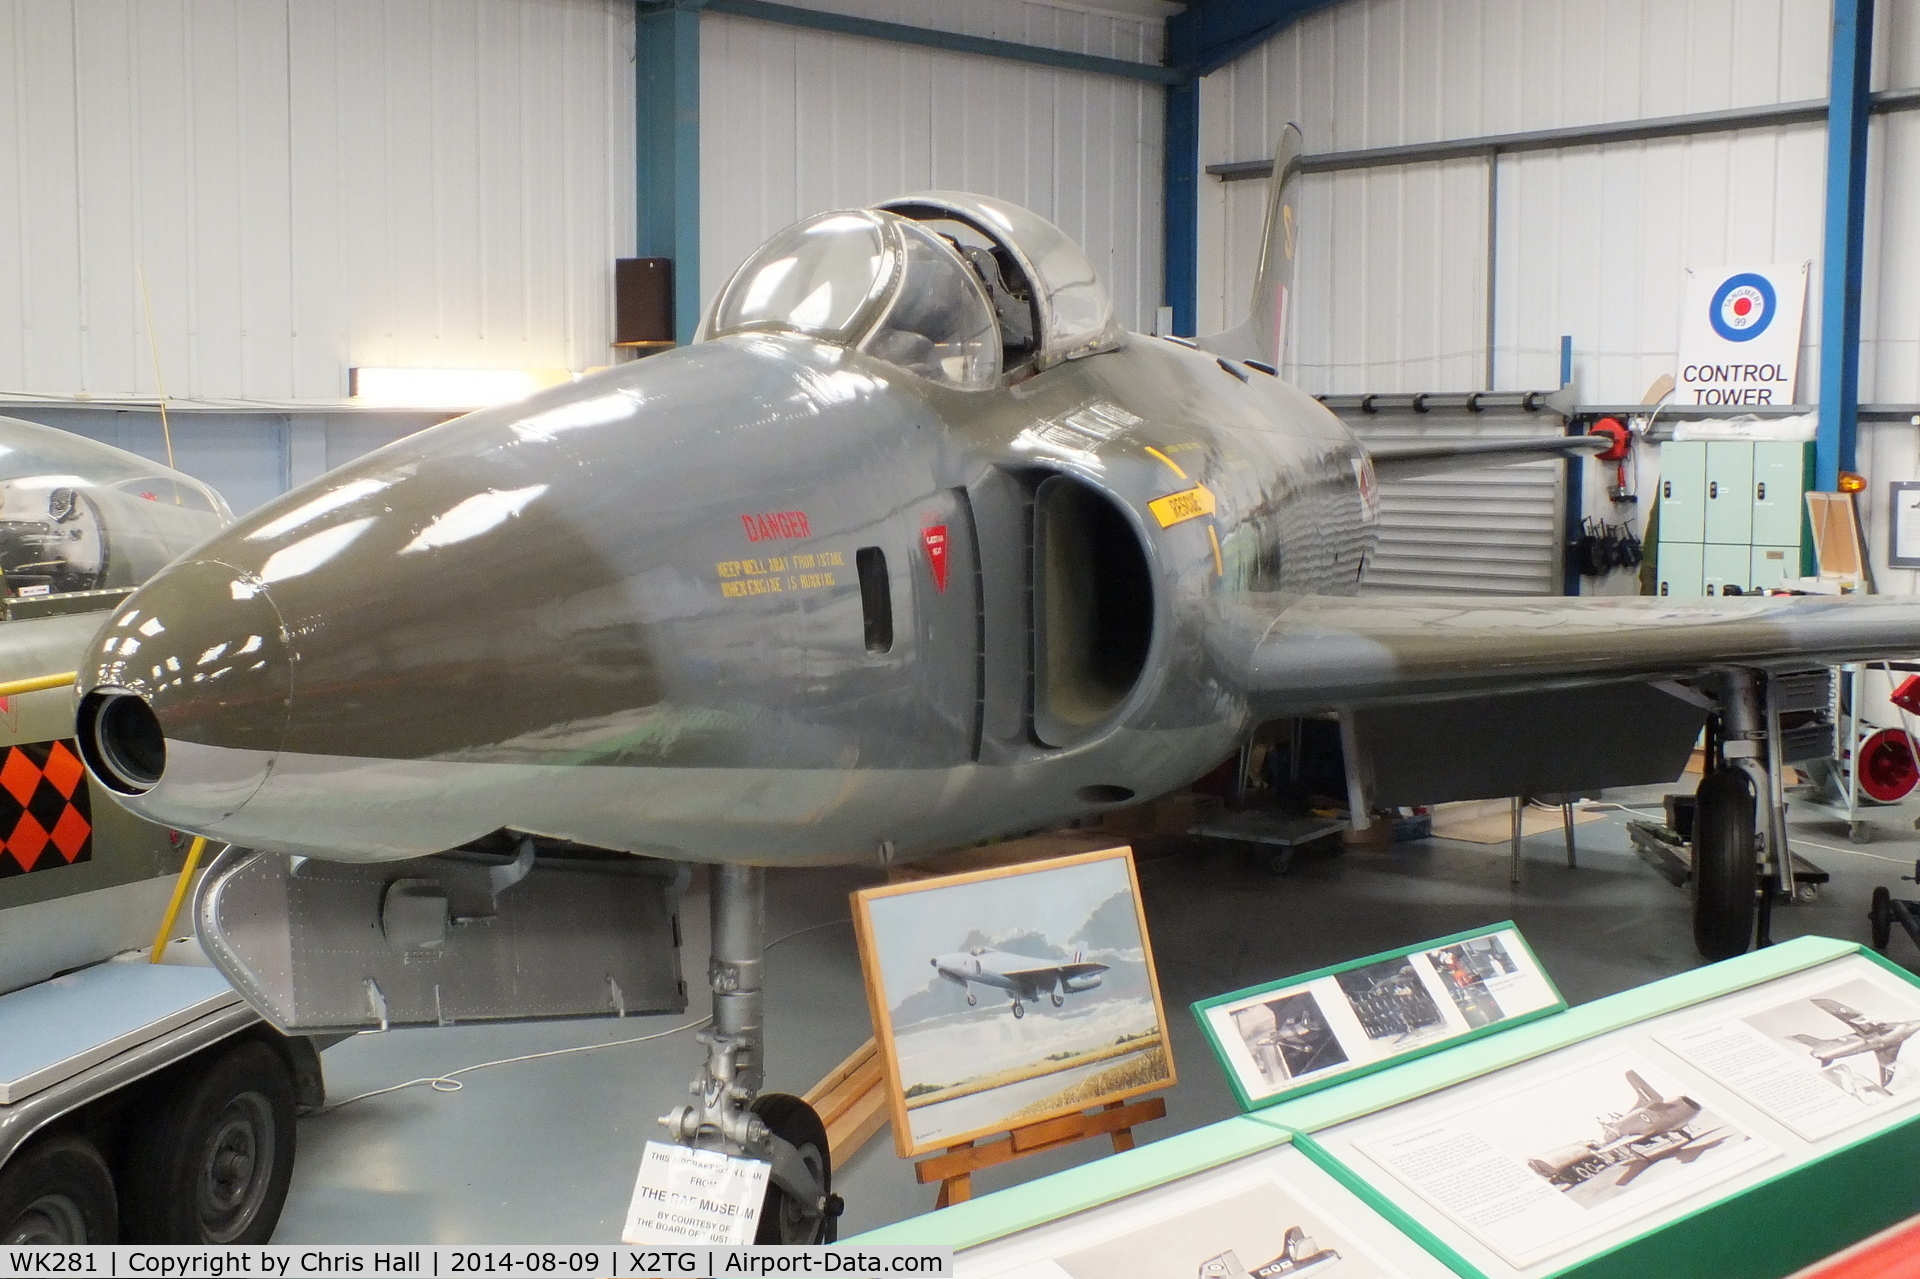 WK281, 1956 Supermarine Swift FR.5 C/N Not found WK281, at the Tangmere Military Aviation Museum